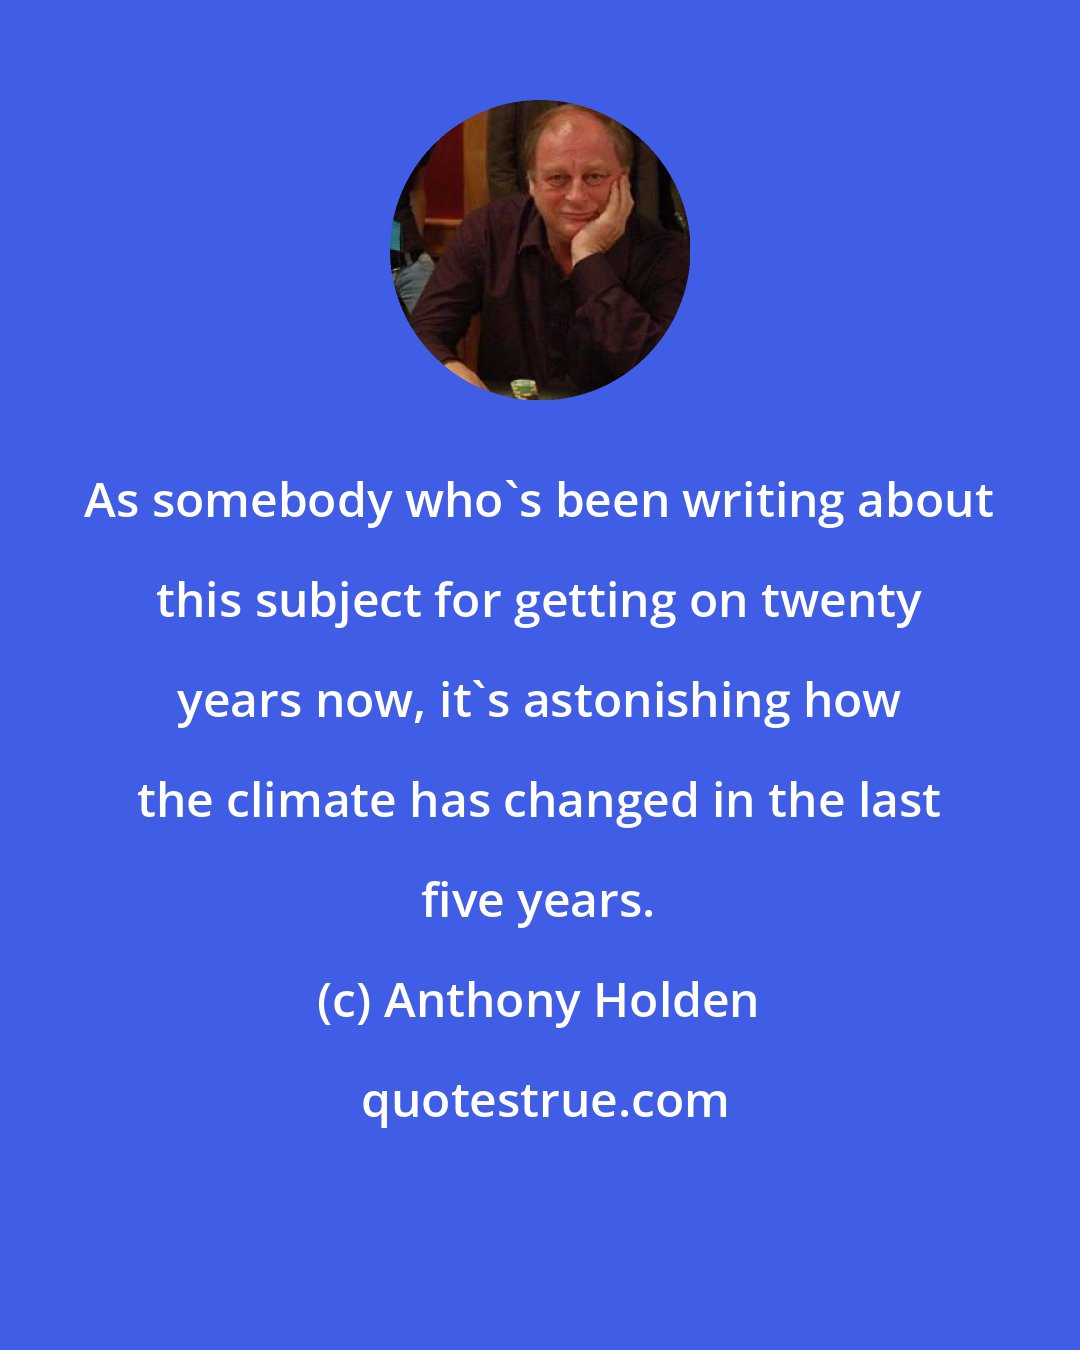 Anthony Holden: As somebody who's been writing about this subject for getting on twenty years now, it's astonishing how the climate has changed in the last five years.